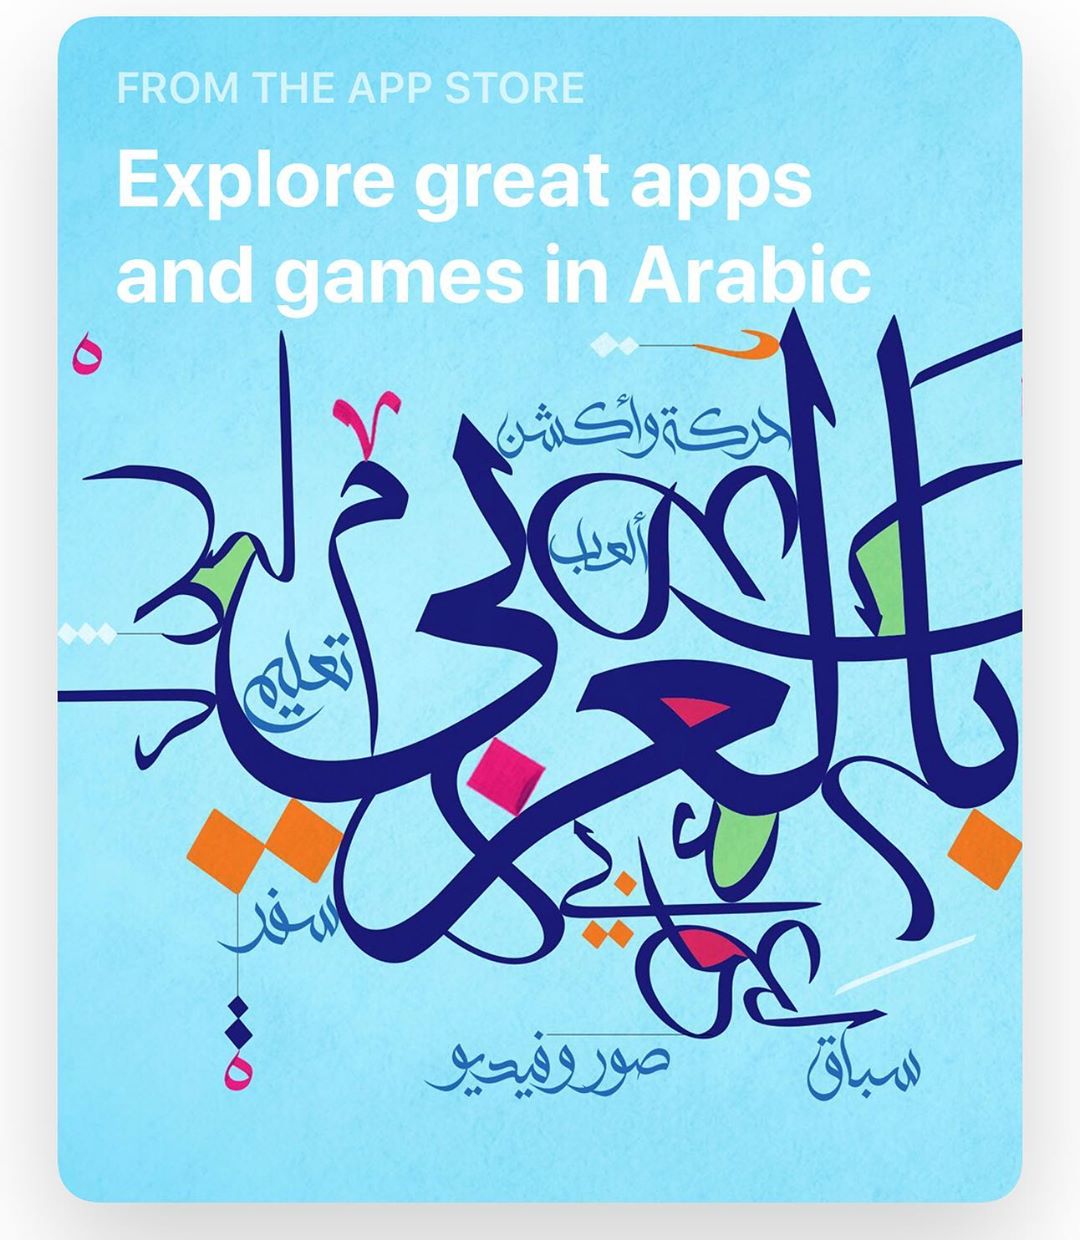 Download Kaligrafi Karya Kaligrafer Kristen Honored to collaborate with @apple for designing the Apple today tab in Arabic.
…-Wissam